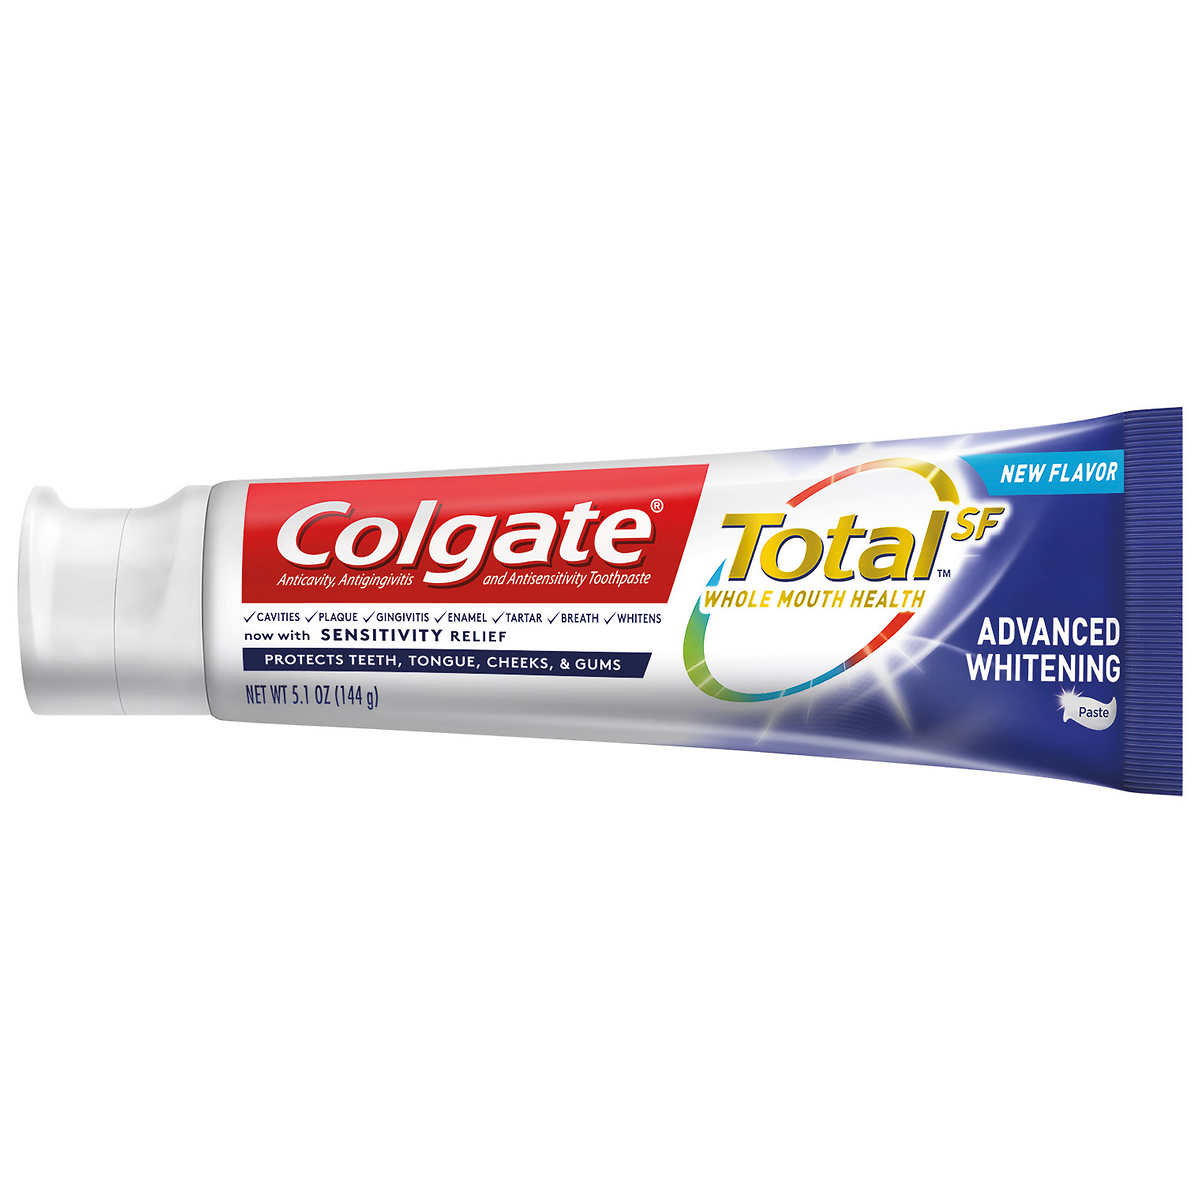 Colgate Total SF Advanced Whitening Toothpaste, 6.4 Ounce (Pack Of 5)